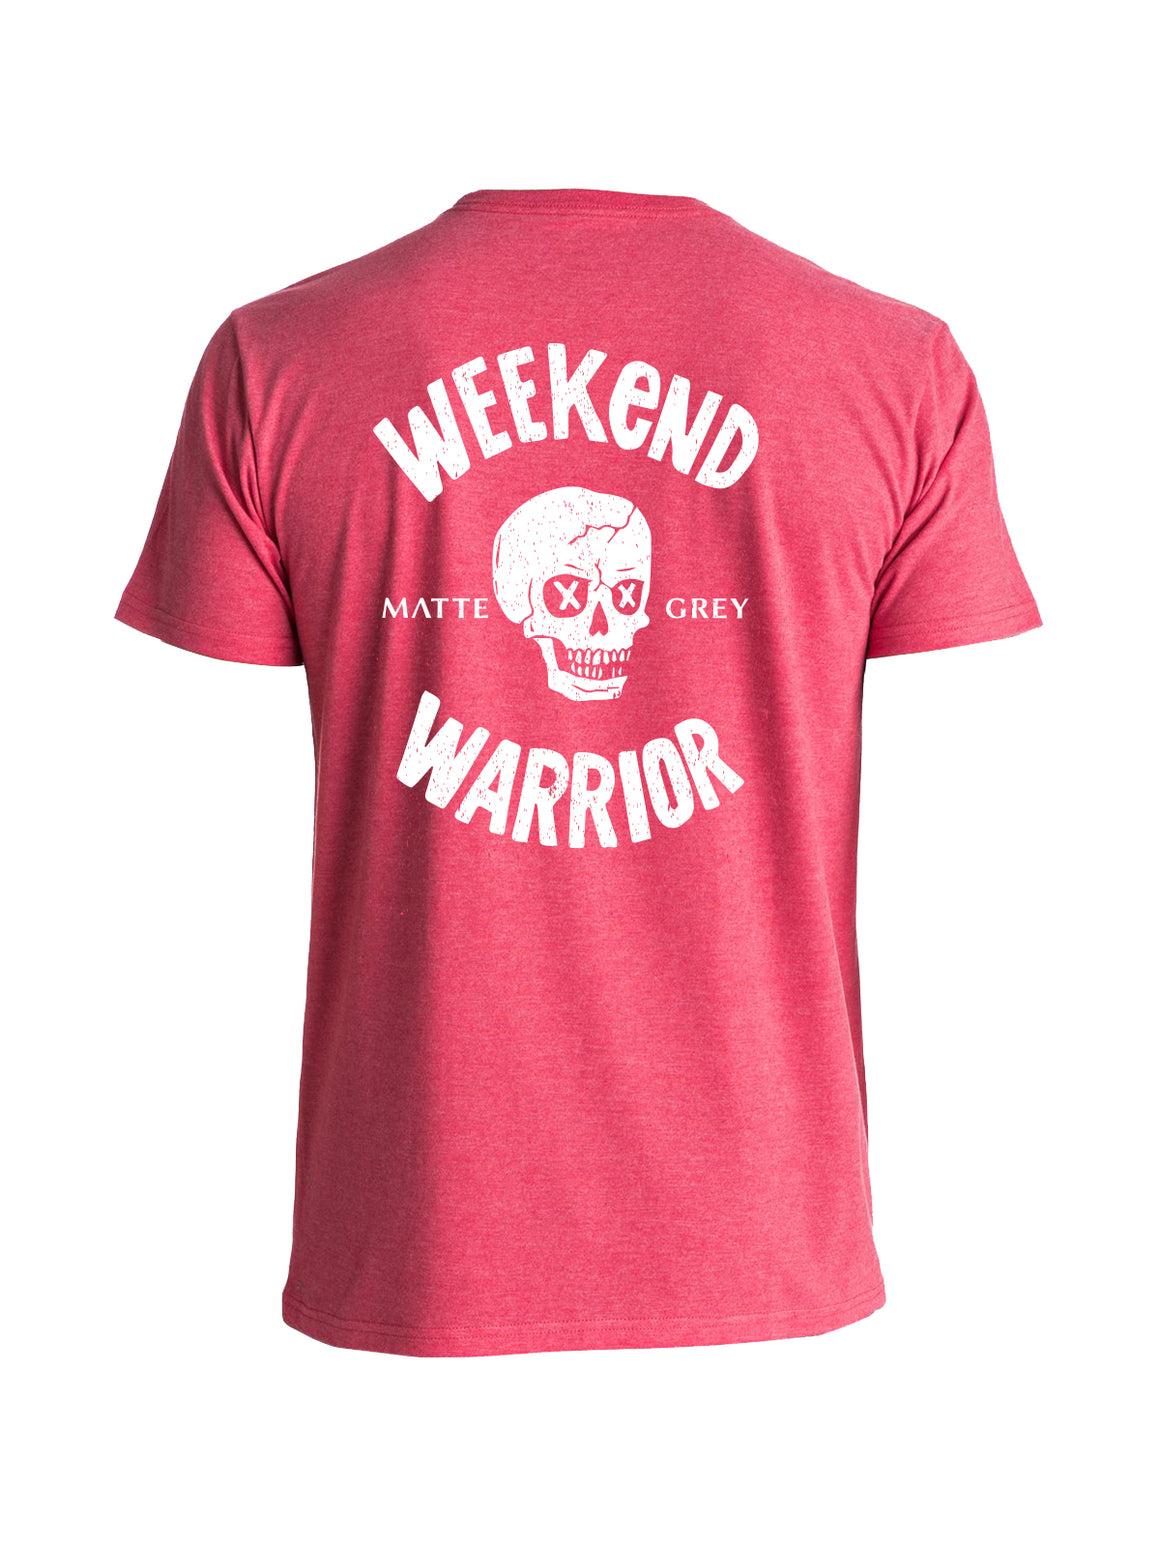 Weekend Warrior Front/Back Tee - Red Heather (White)